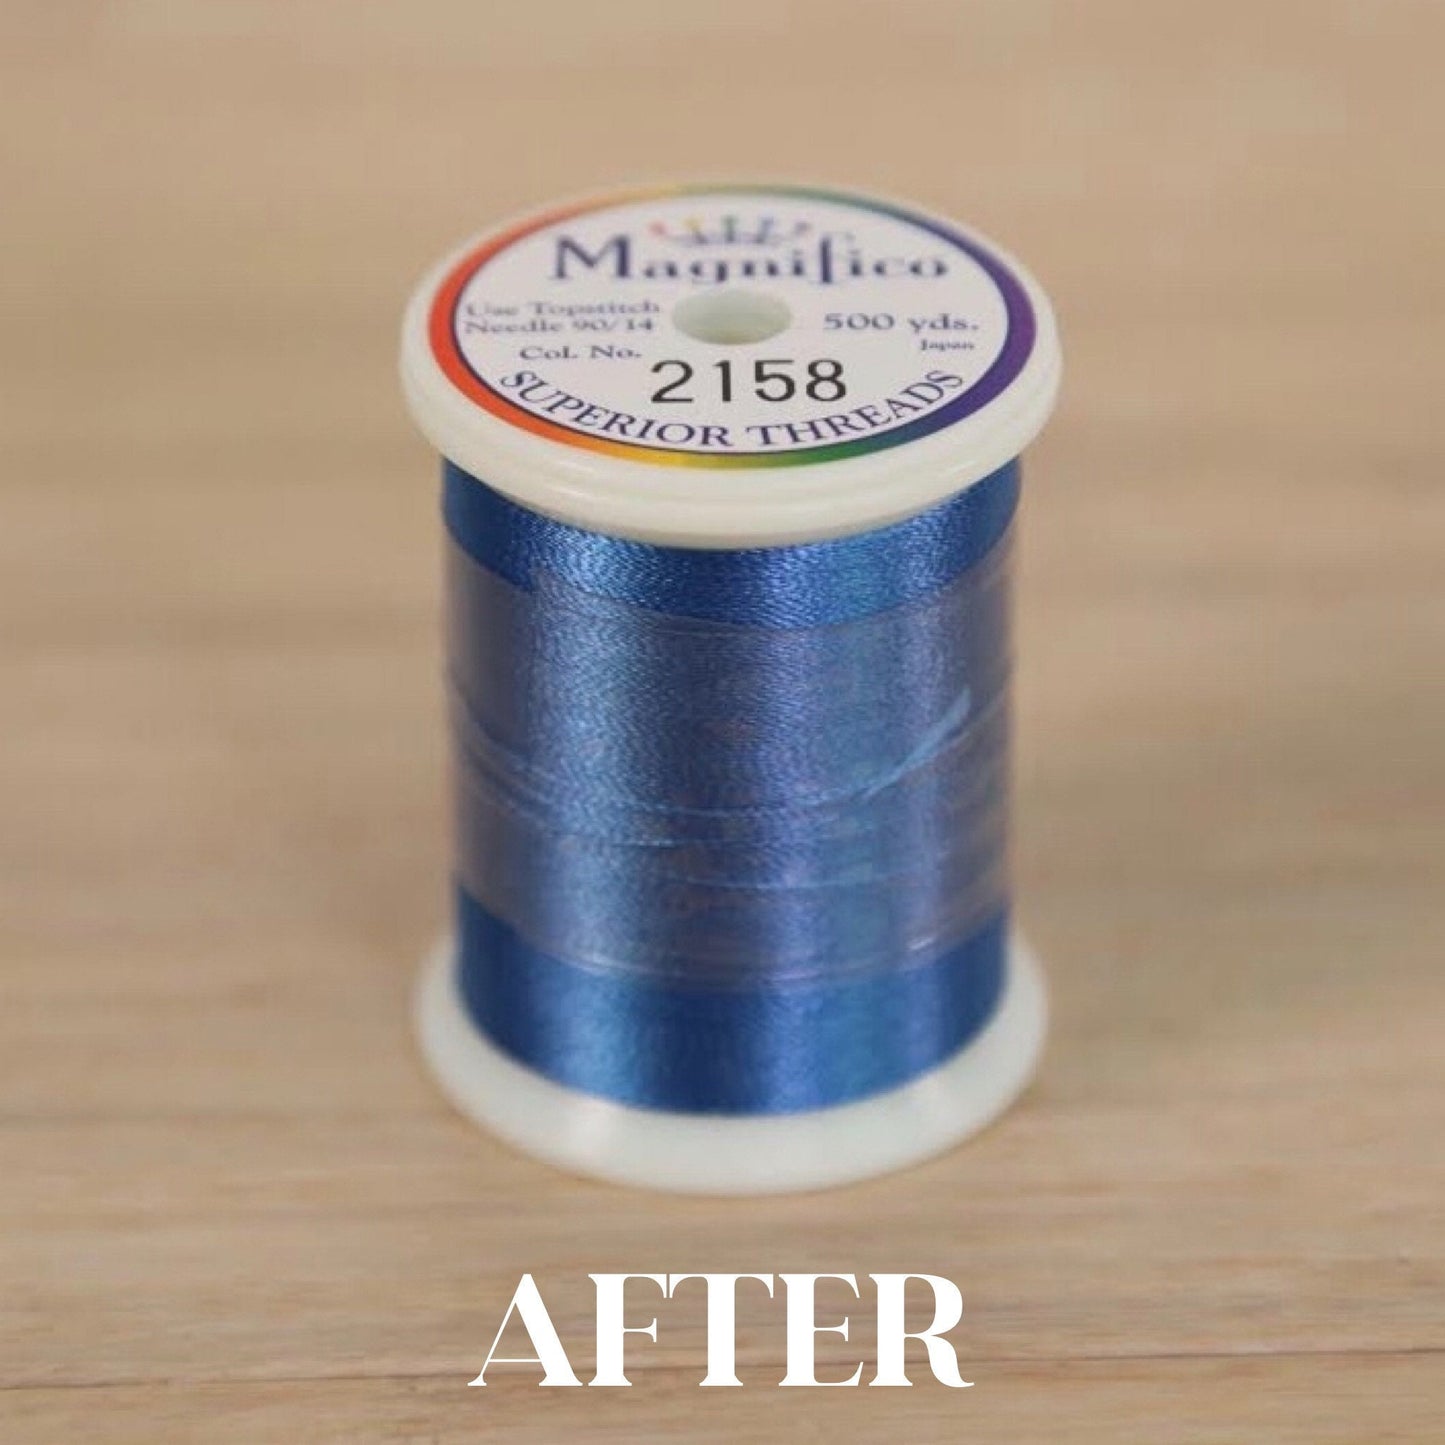 Hugo's Amazing Tape 1" x 50 ft Roll - keep your sewing threads neat and organized.  Self Adhering, Reusable